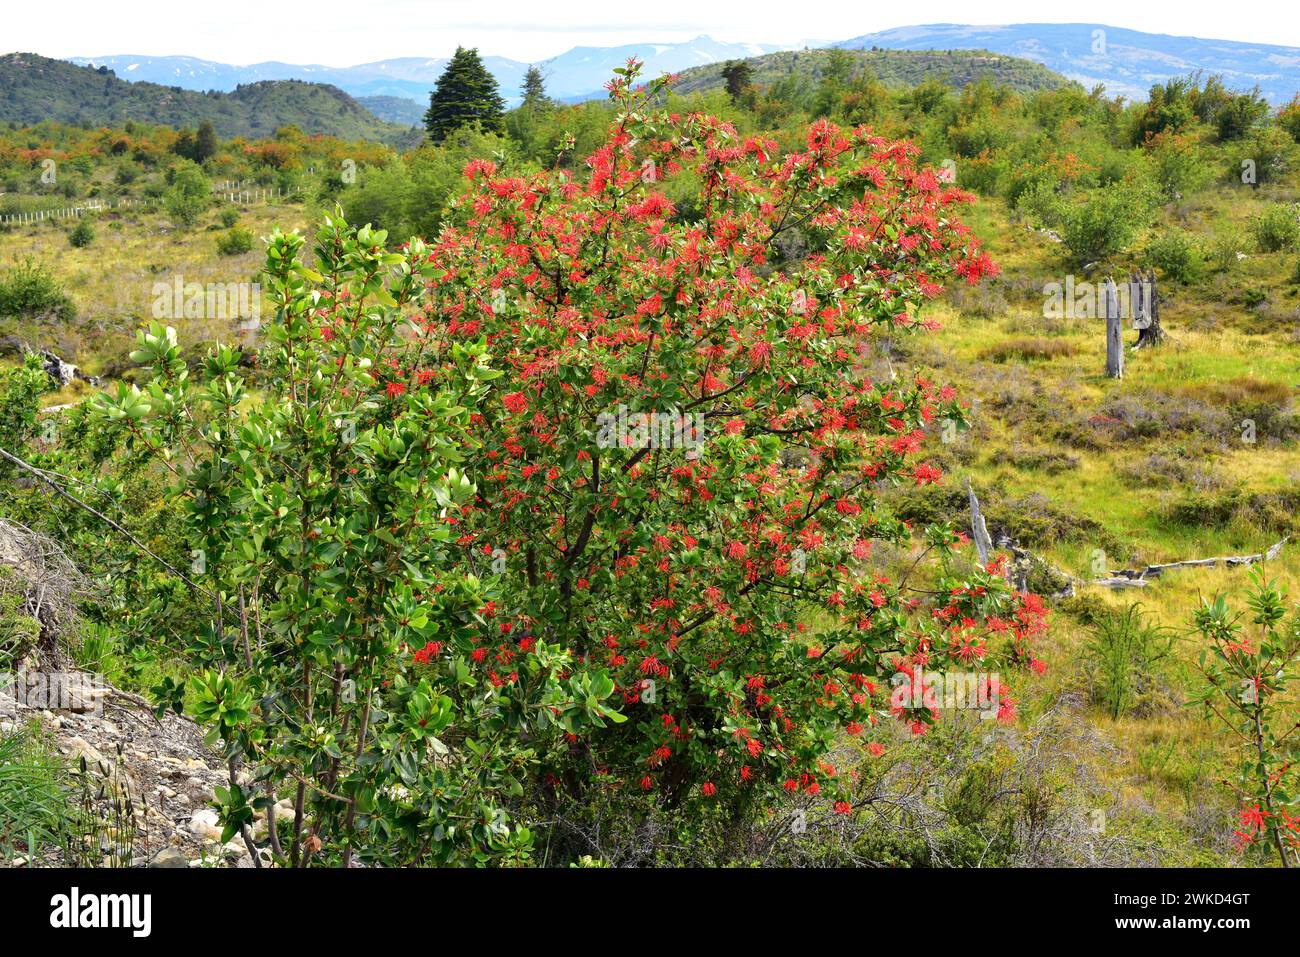 Notro or Chilean firetree (Embothrium coccineum) is a small evergreen tree native to temperate regions of Chile and Argentina. This photo was taken in Stock Photo